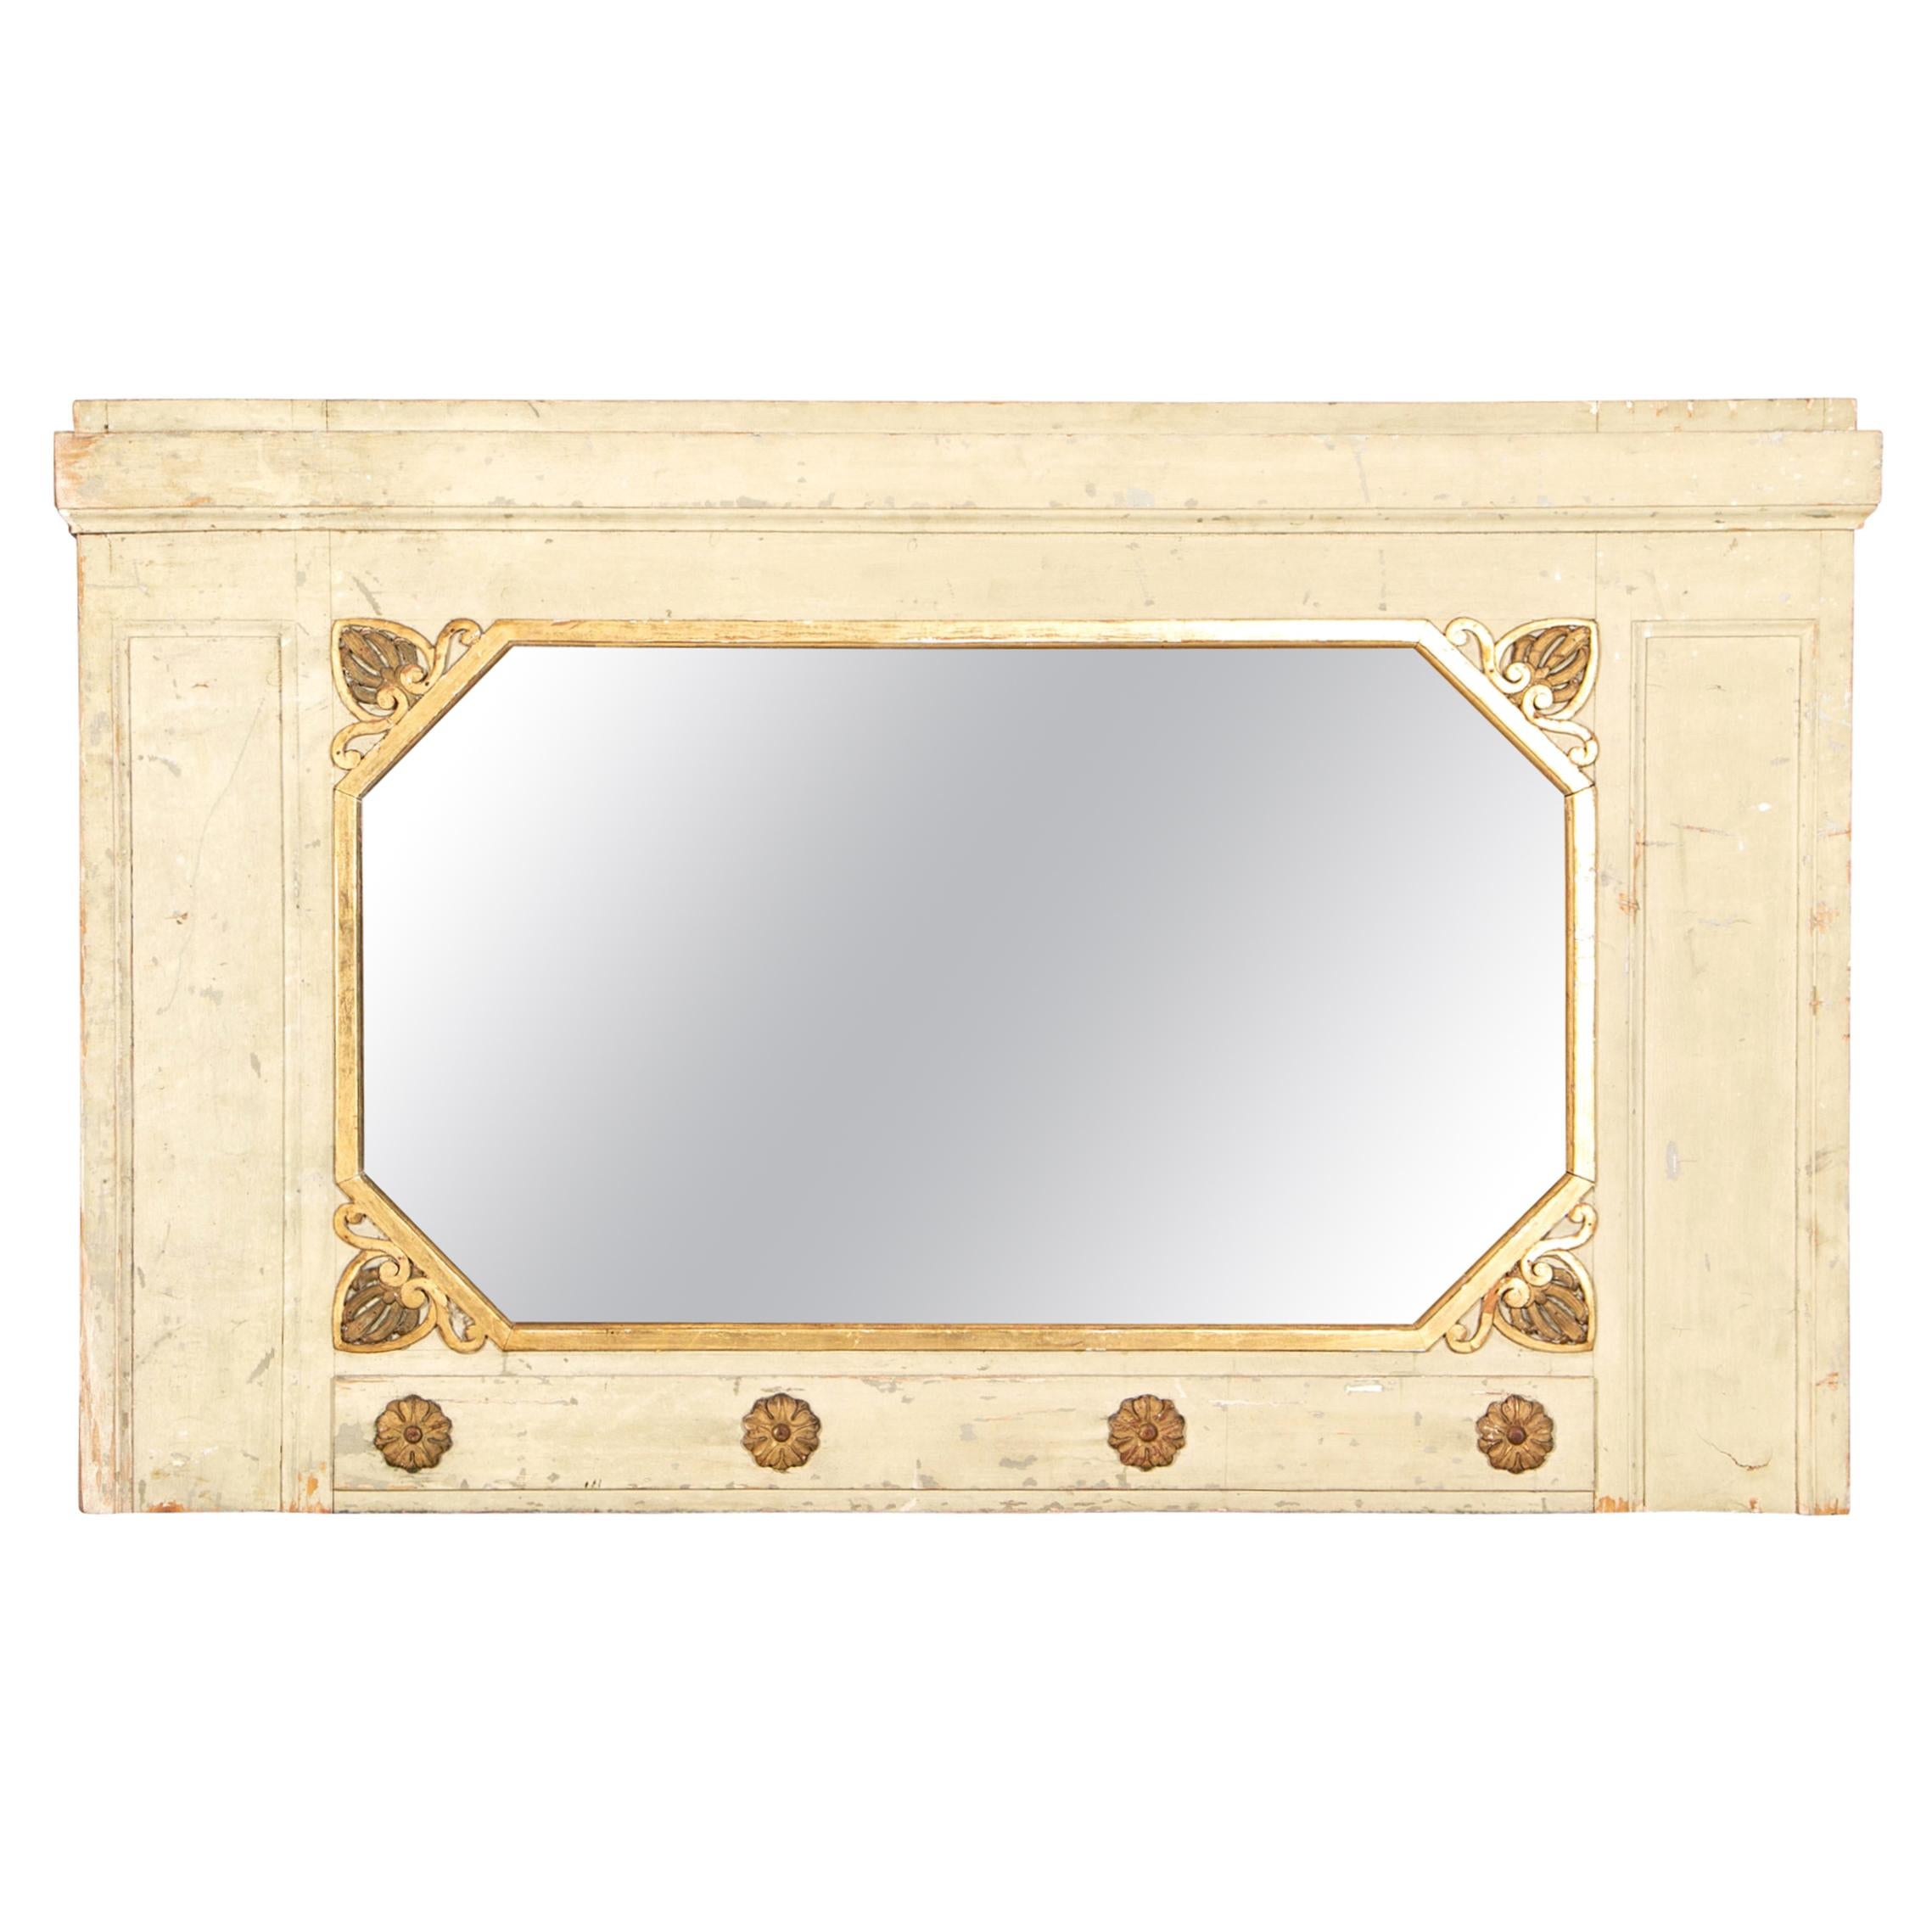 Neoclassical Style Painted and Gilt Decorated Mirror